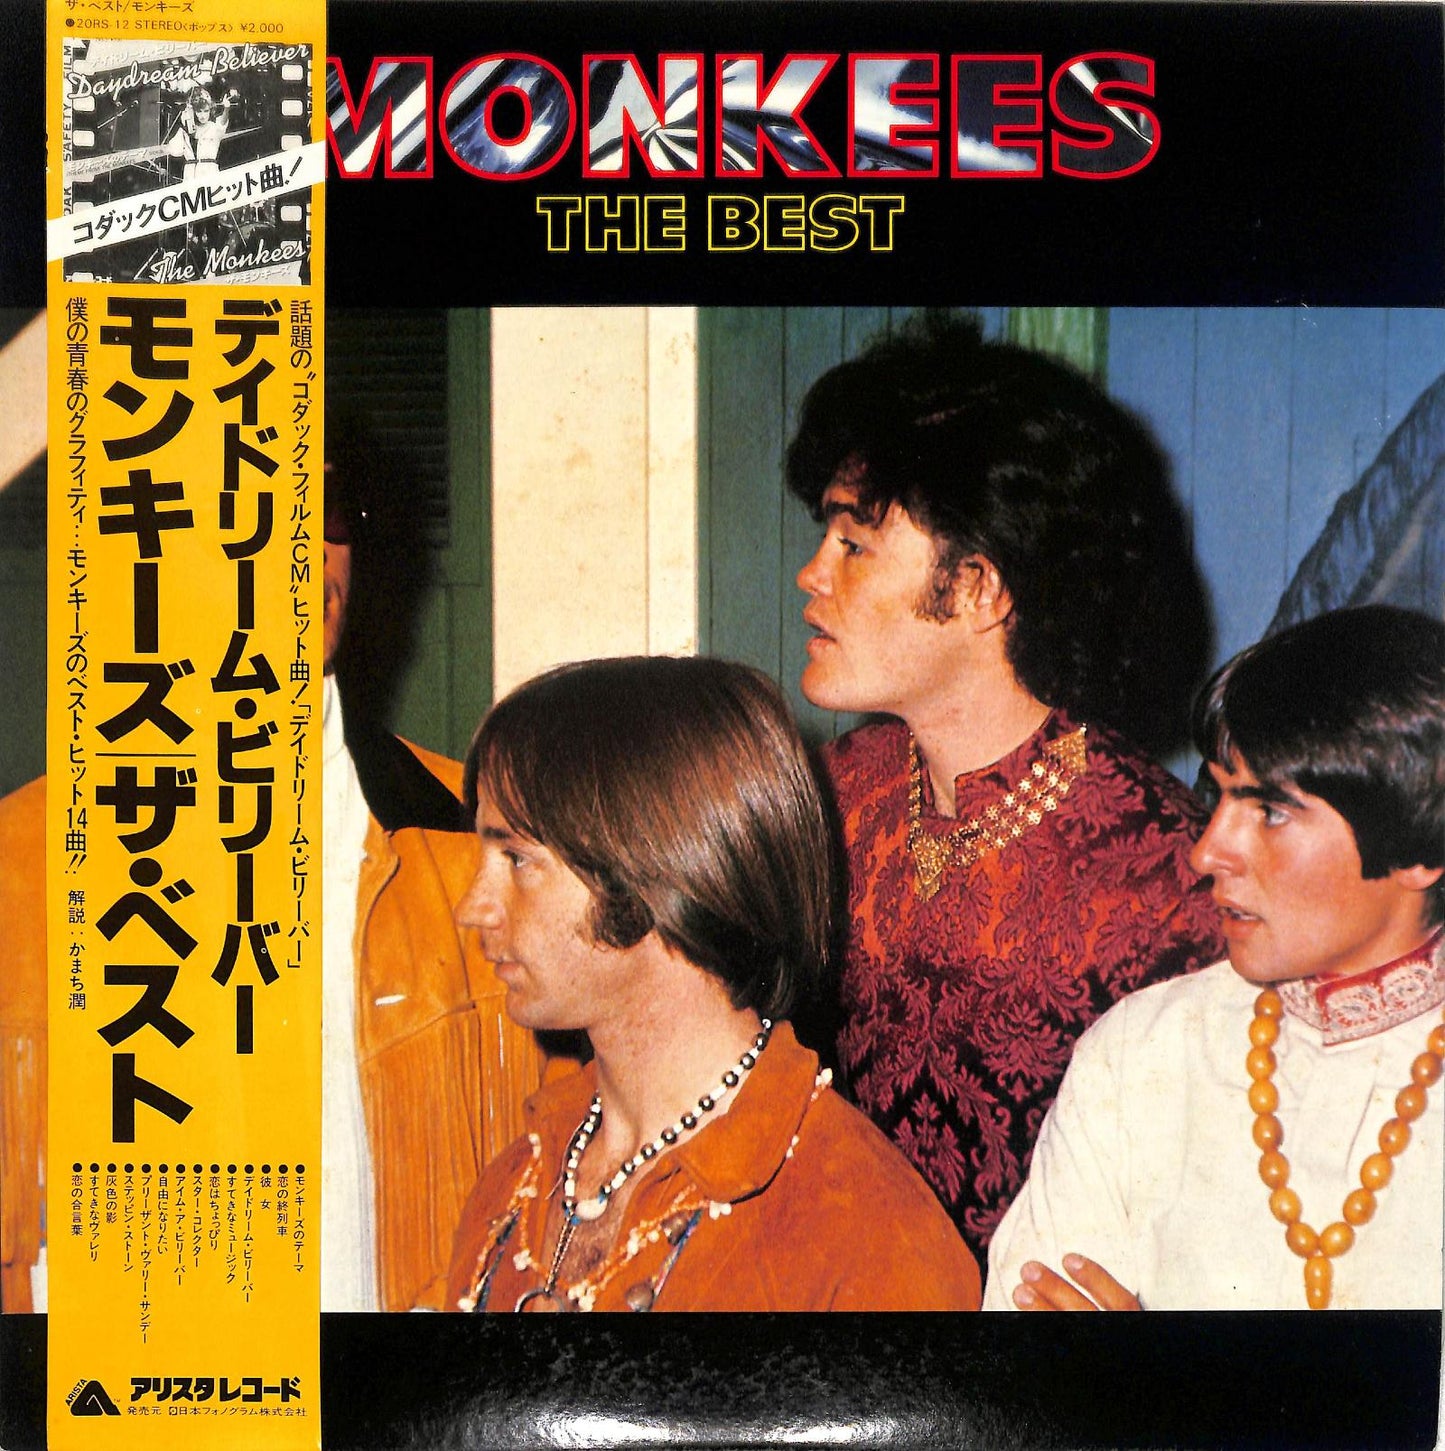 THE MONKEES - The Best